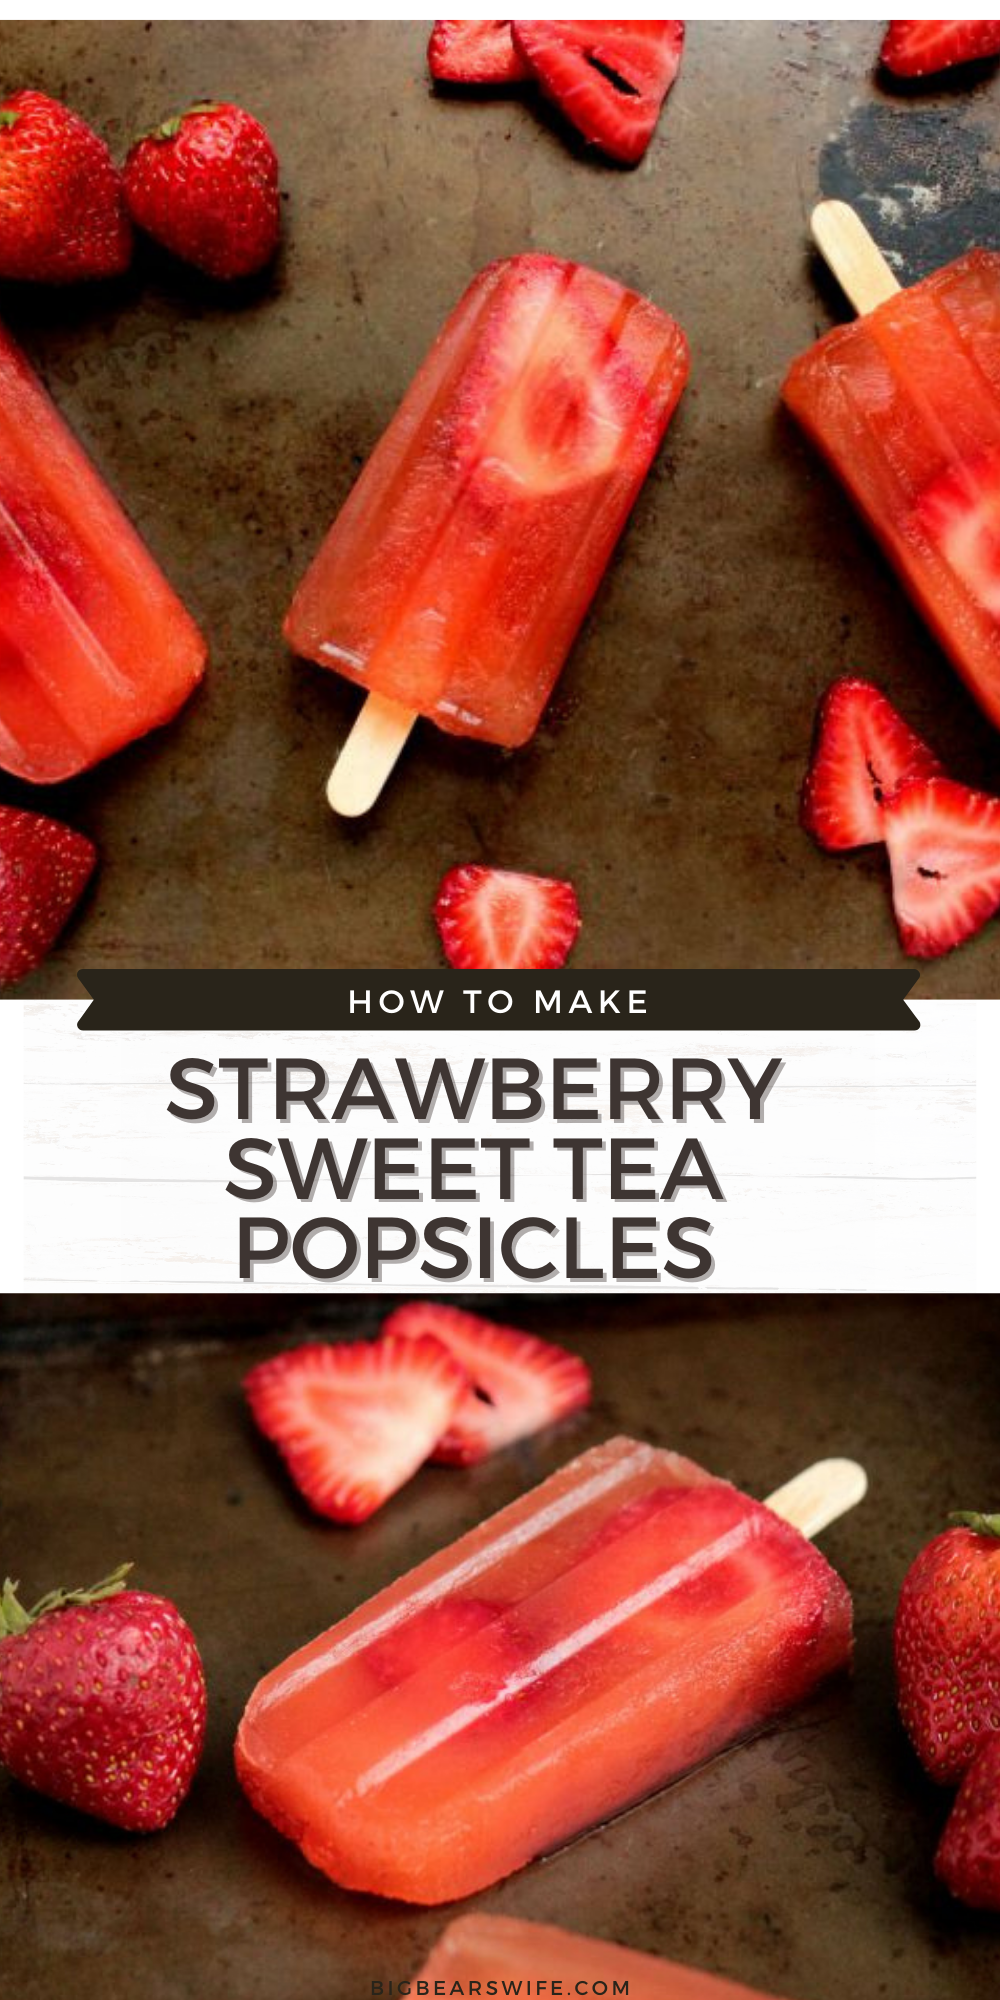 These Strawberry Sweet Tea Popsicles are super refreshing and perfect for a hot summer day!  via @bigbearswife